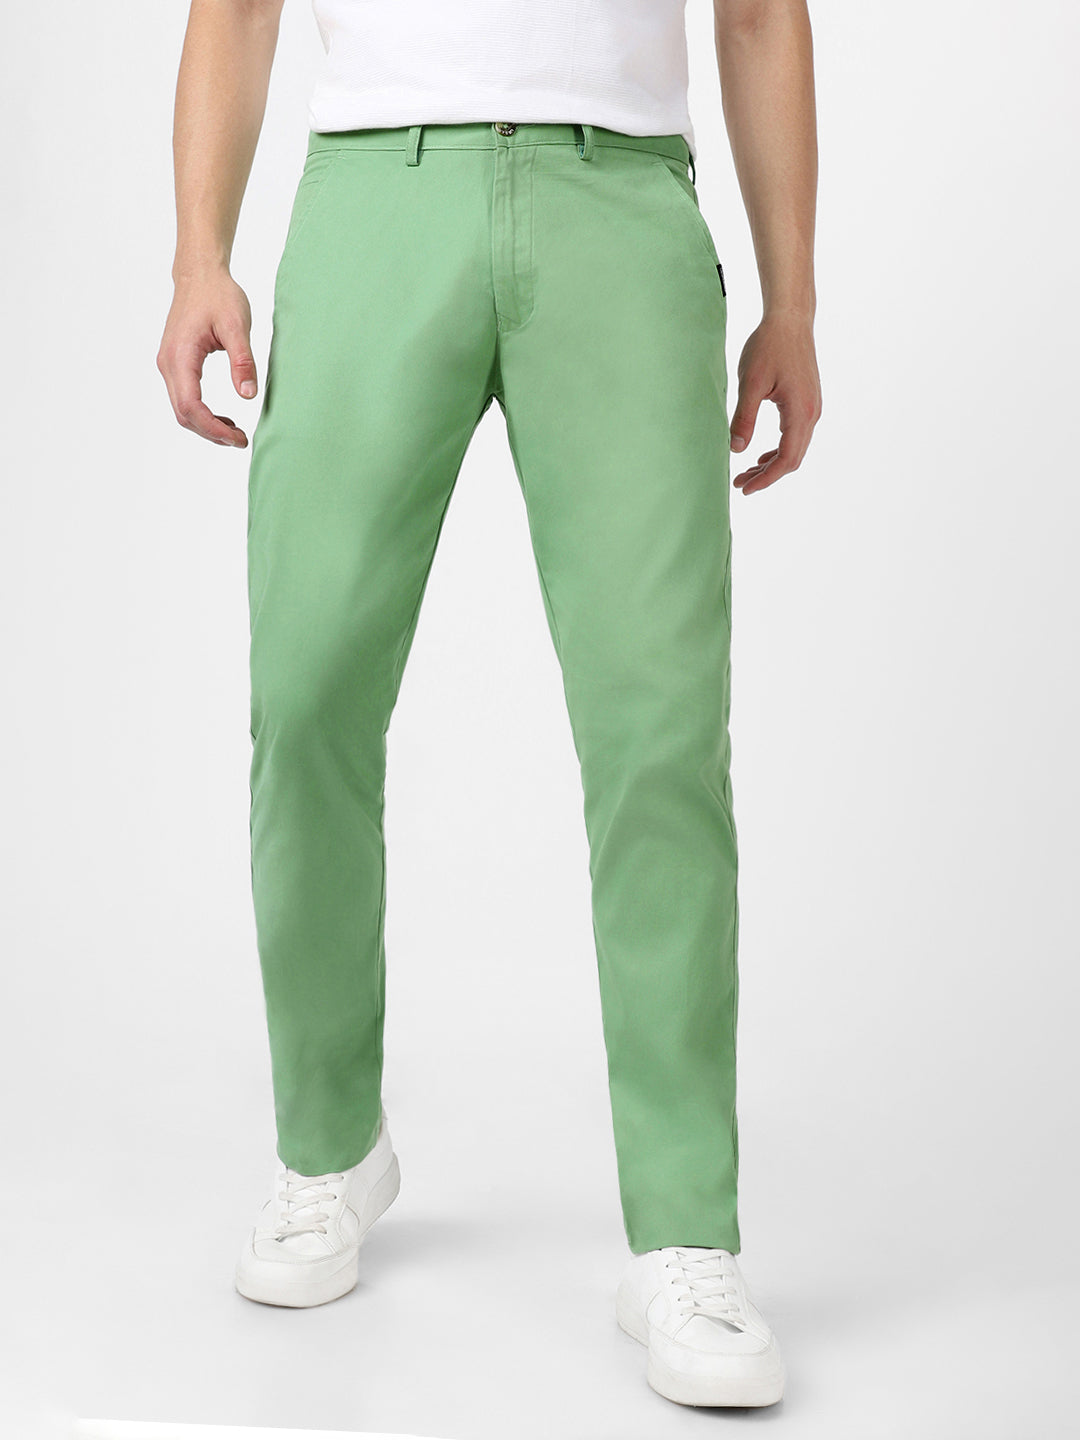 Buy Pink and Parrot Green Combo of 2 Men Pants Cotton for Best Price,  Reviews, Free Shipping